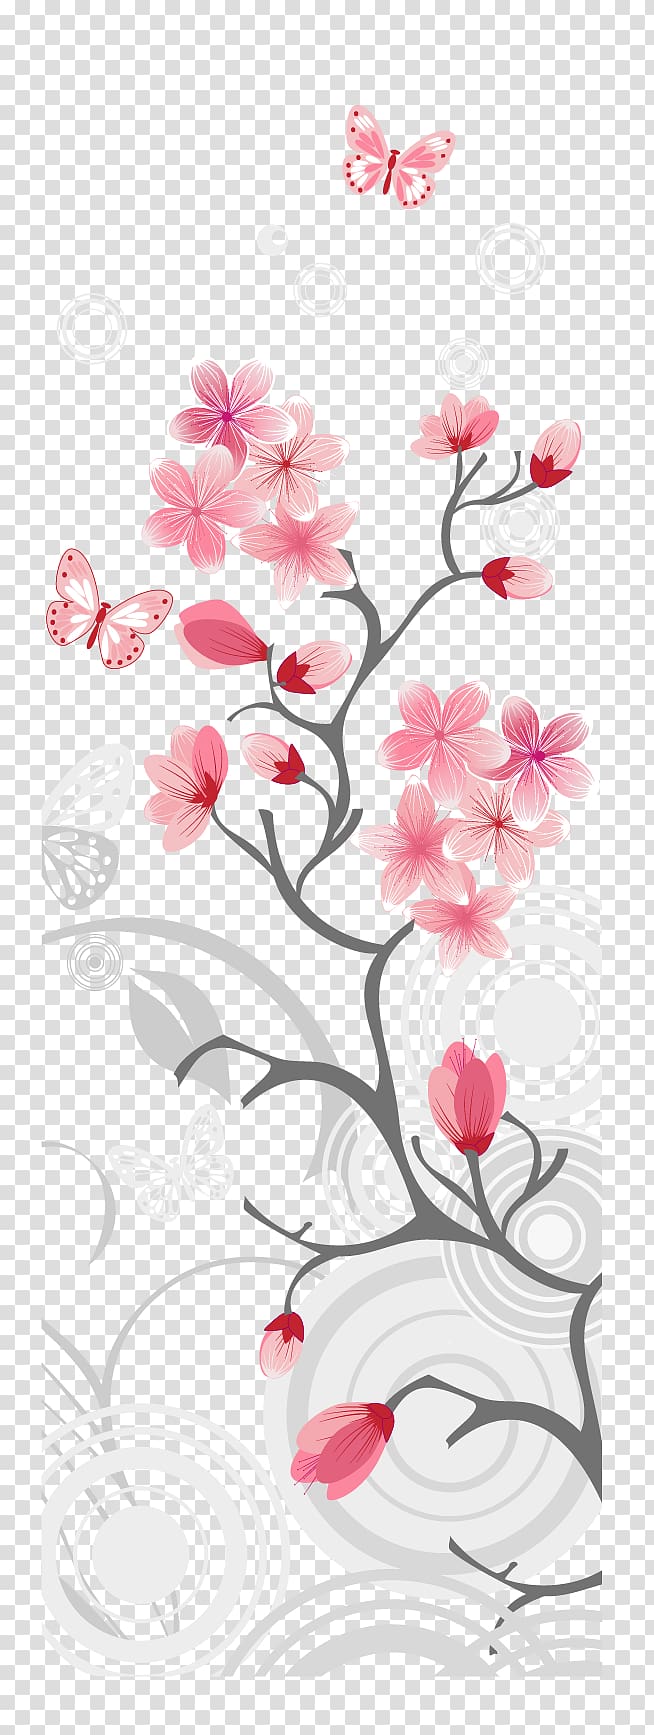 Cherry blossom Illustration, Cherry blossom branch cherry petals transparent background PNG clipart